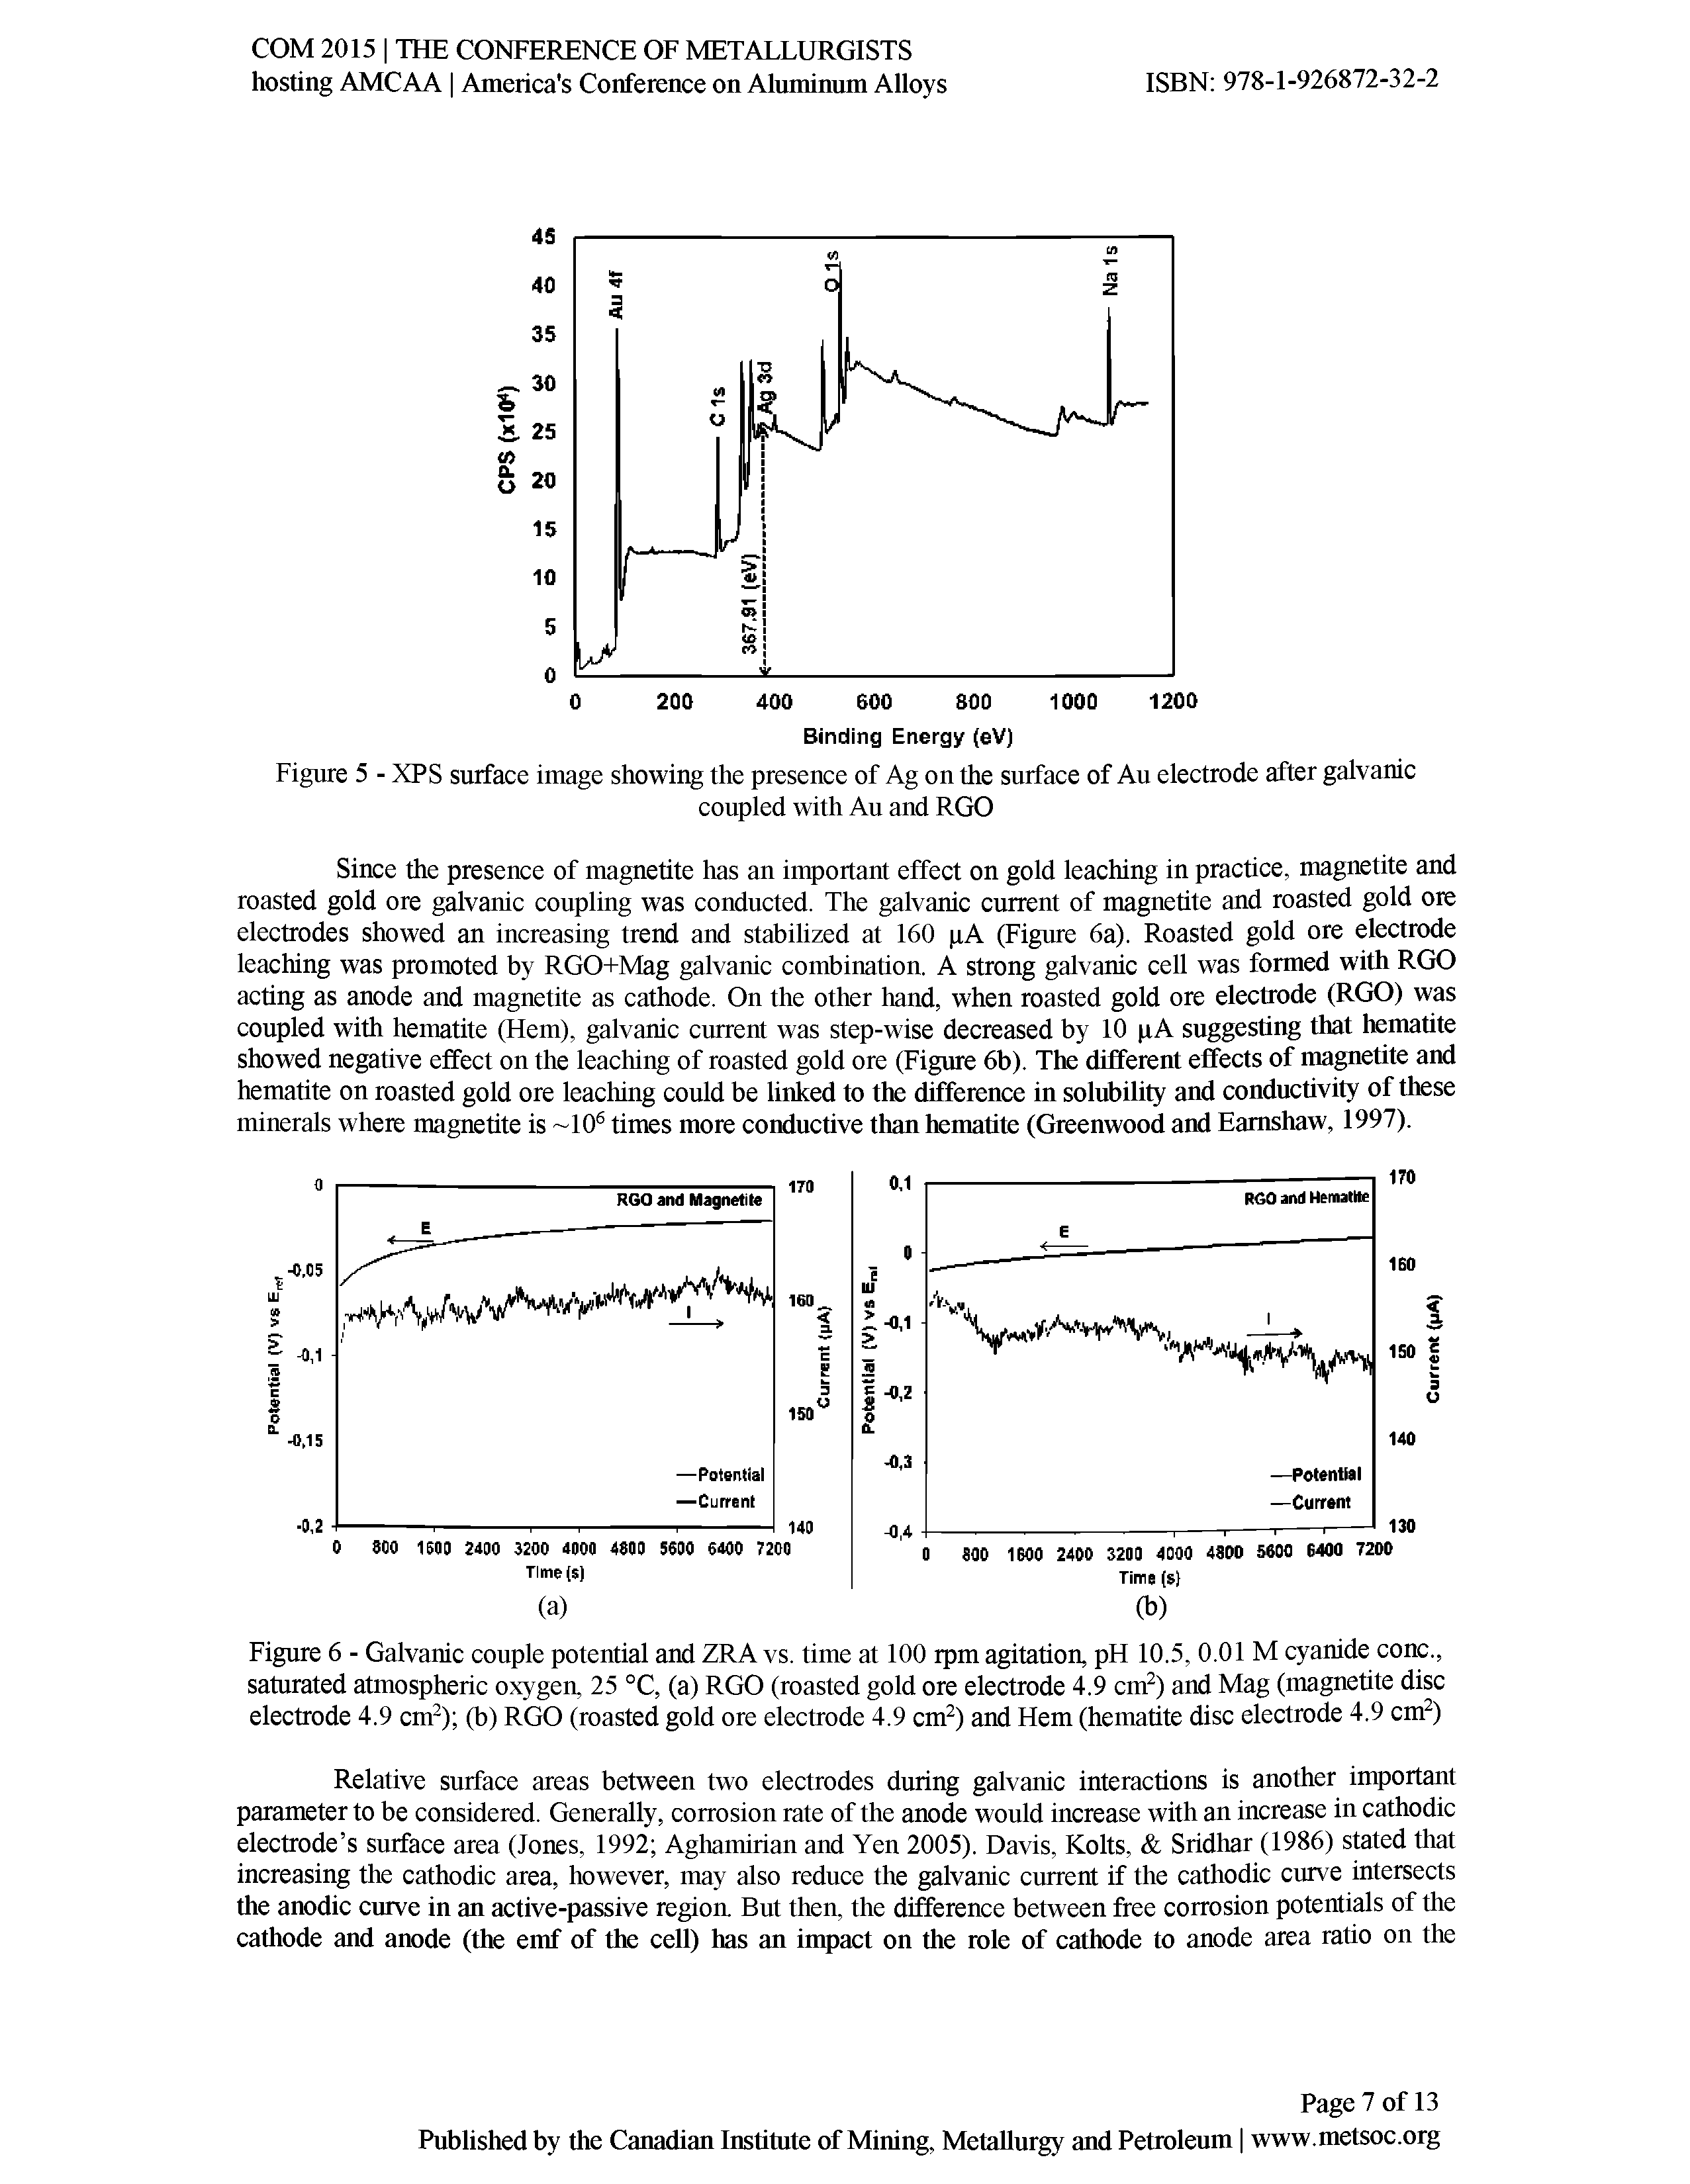 Figure 6 - Galvanic couple potential and ZRA vs. time at 100 rpm agitation, pH 10.5, 0.01 M cyanide cone., saturated atmospheric oxygen, 25 °C, (a) RGO (roasted gold ore electrode 4.9 cm2) and Mag (magnetite disc electrode 4.9 cm2) (b) RGO (roasted gold ore electrode 4.9 cm2) and Hem (hematite disc electrode 4.9 cm2)...